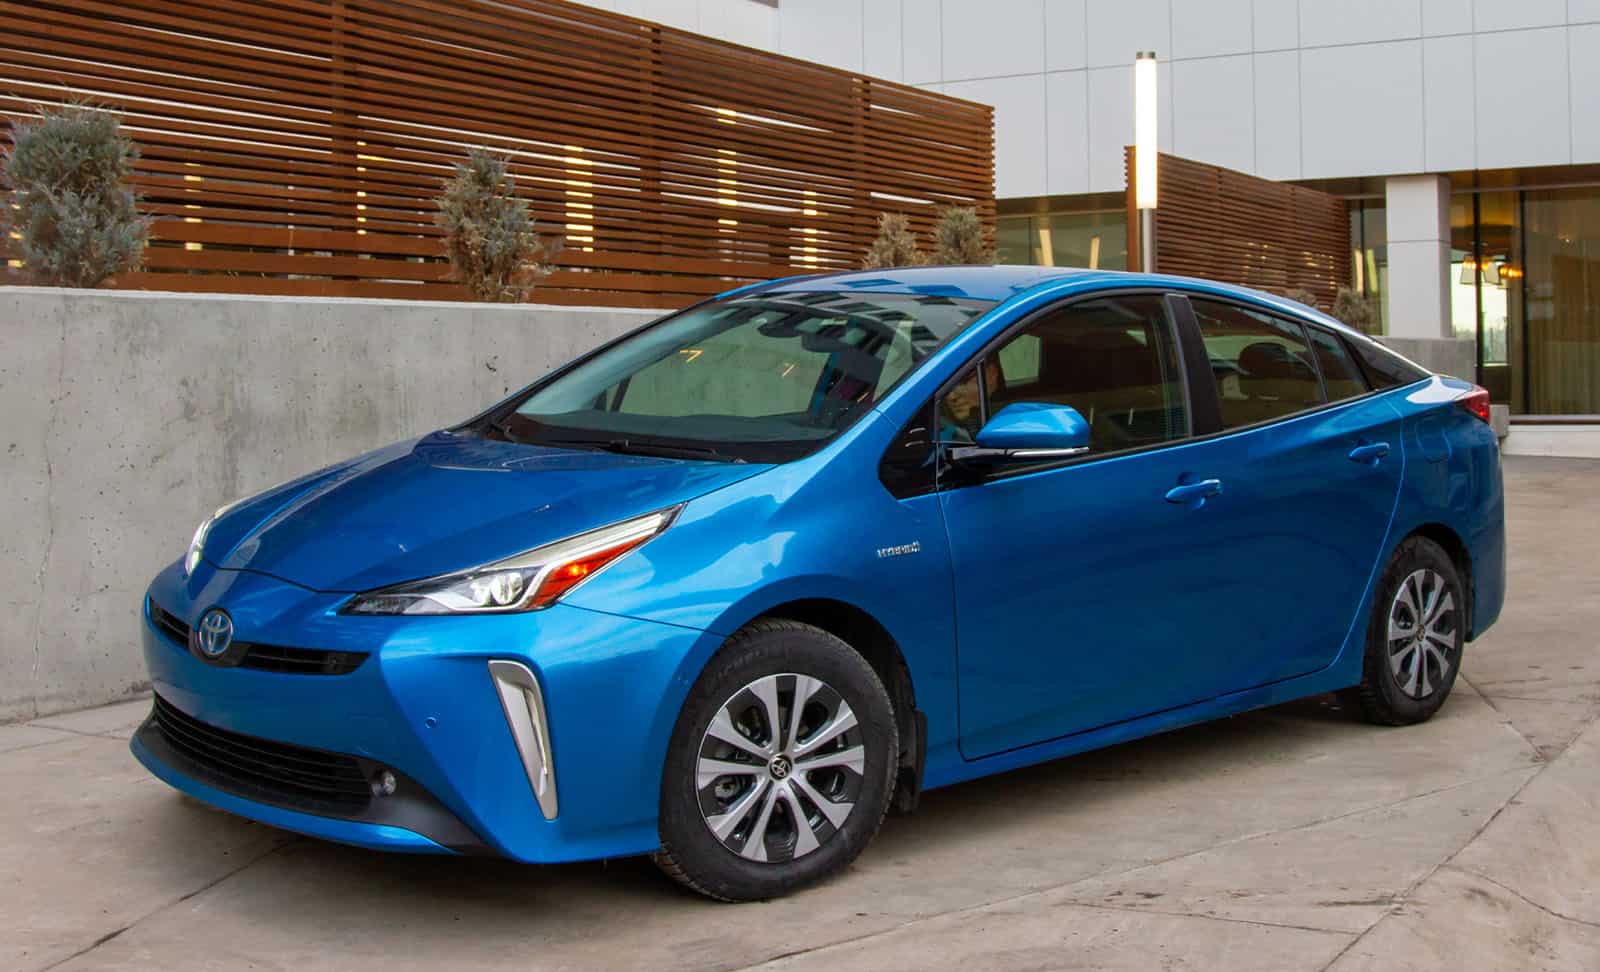 best hybrid cars Best hybrid cars 2019 (and the ones to avoid) - Luud Kiiw